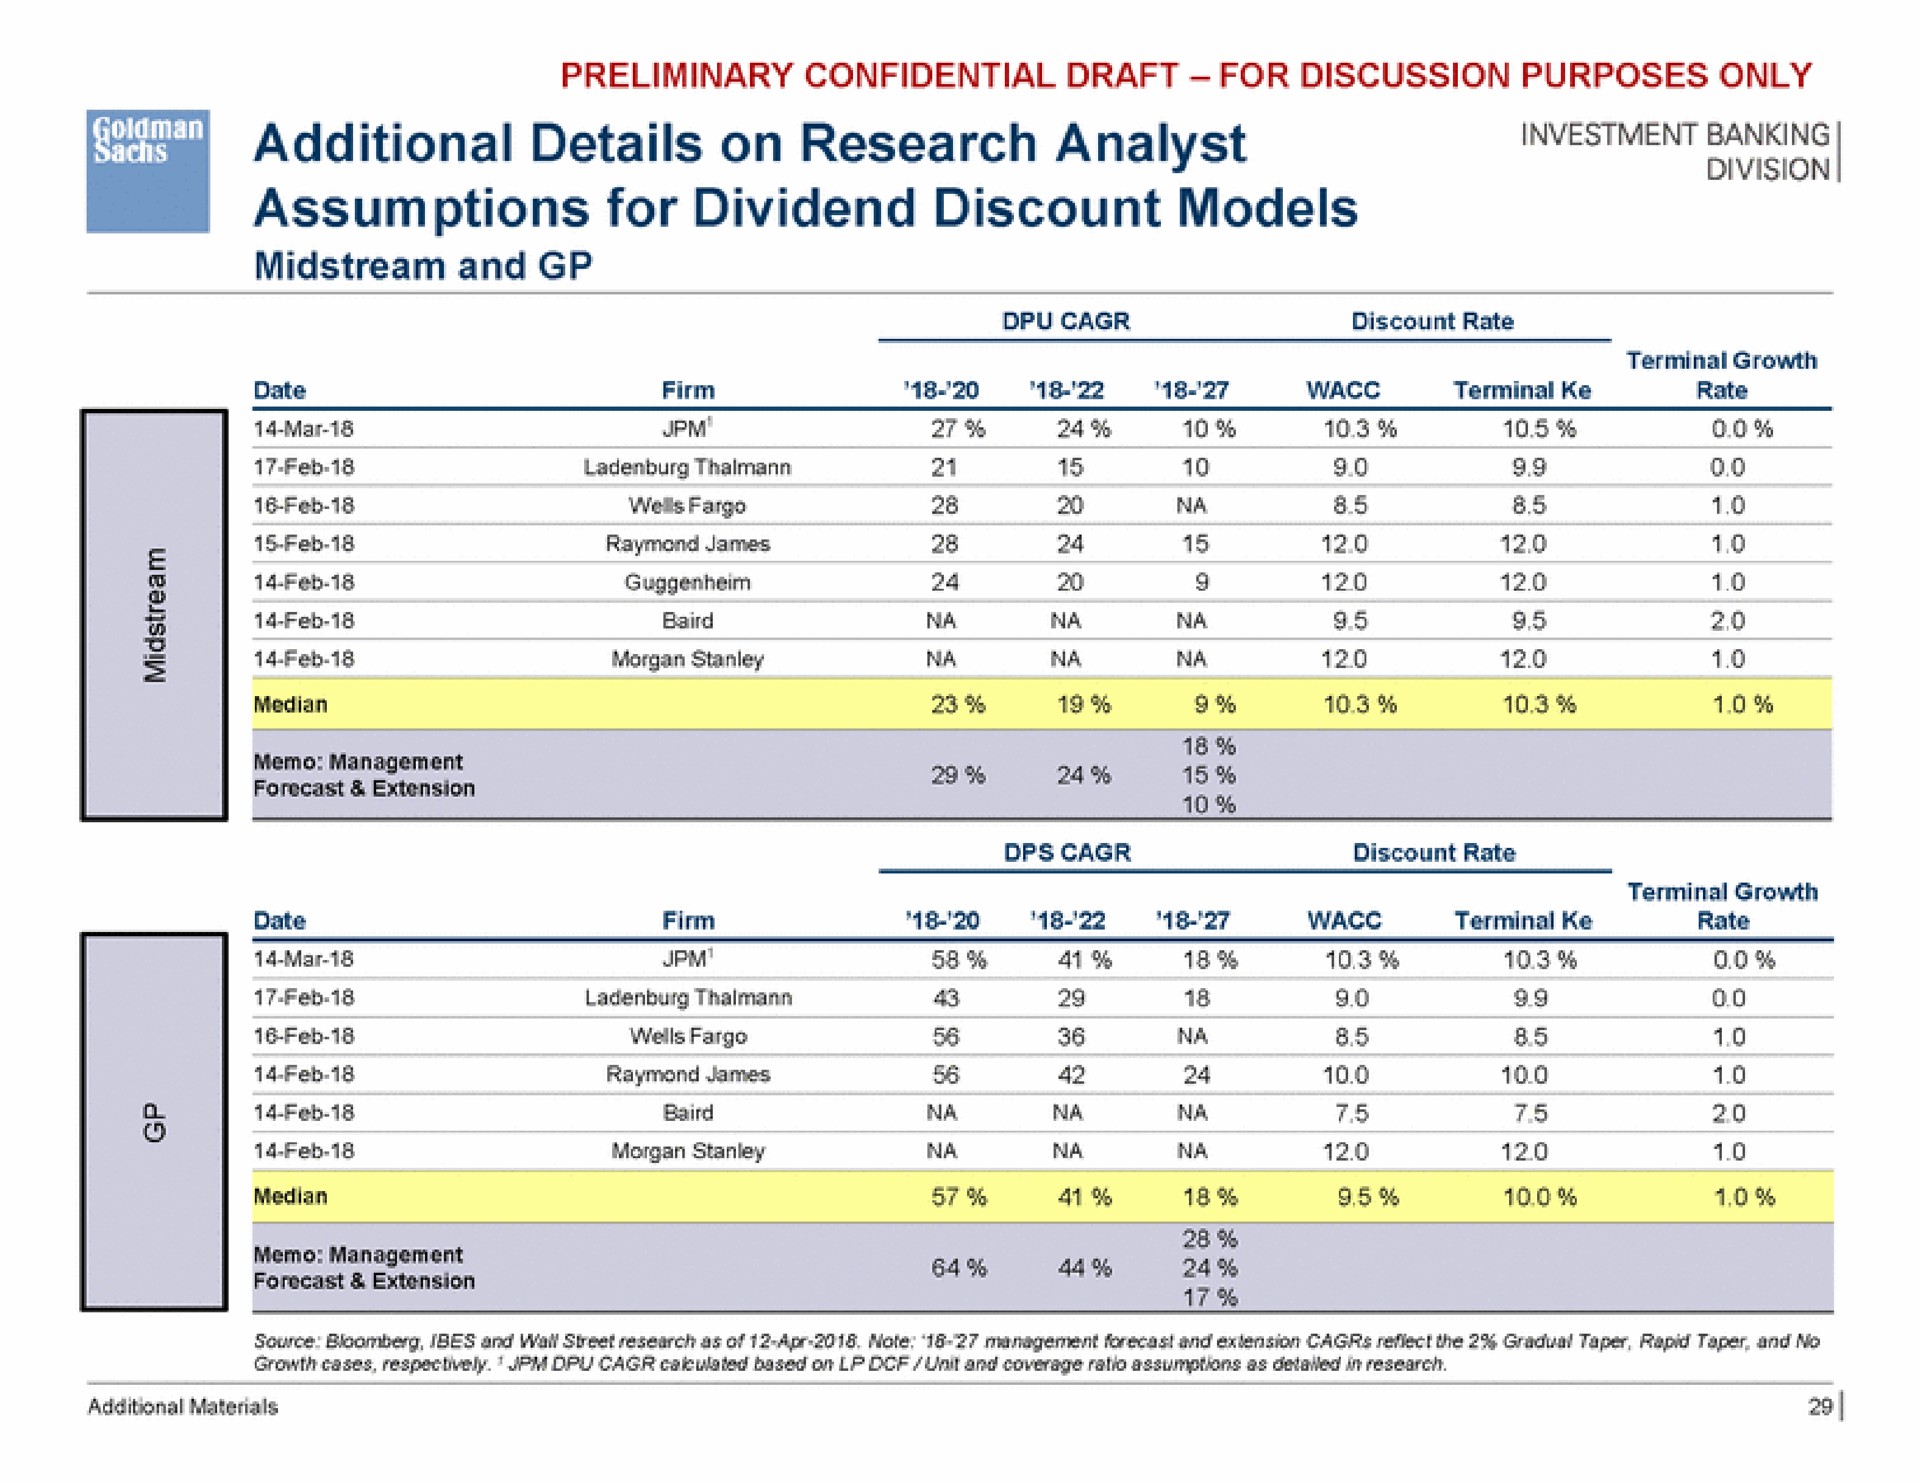 investment banking additional details on research analyst assumptions for dividend discount models forecast forecast extension a | Goldman Sachs